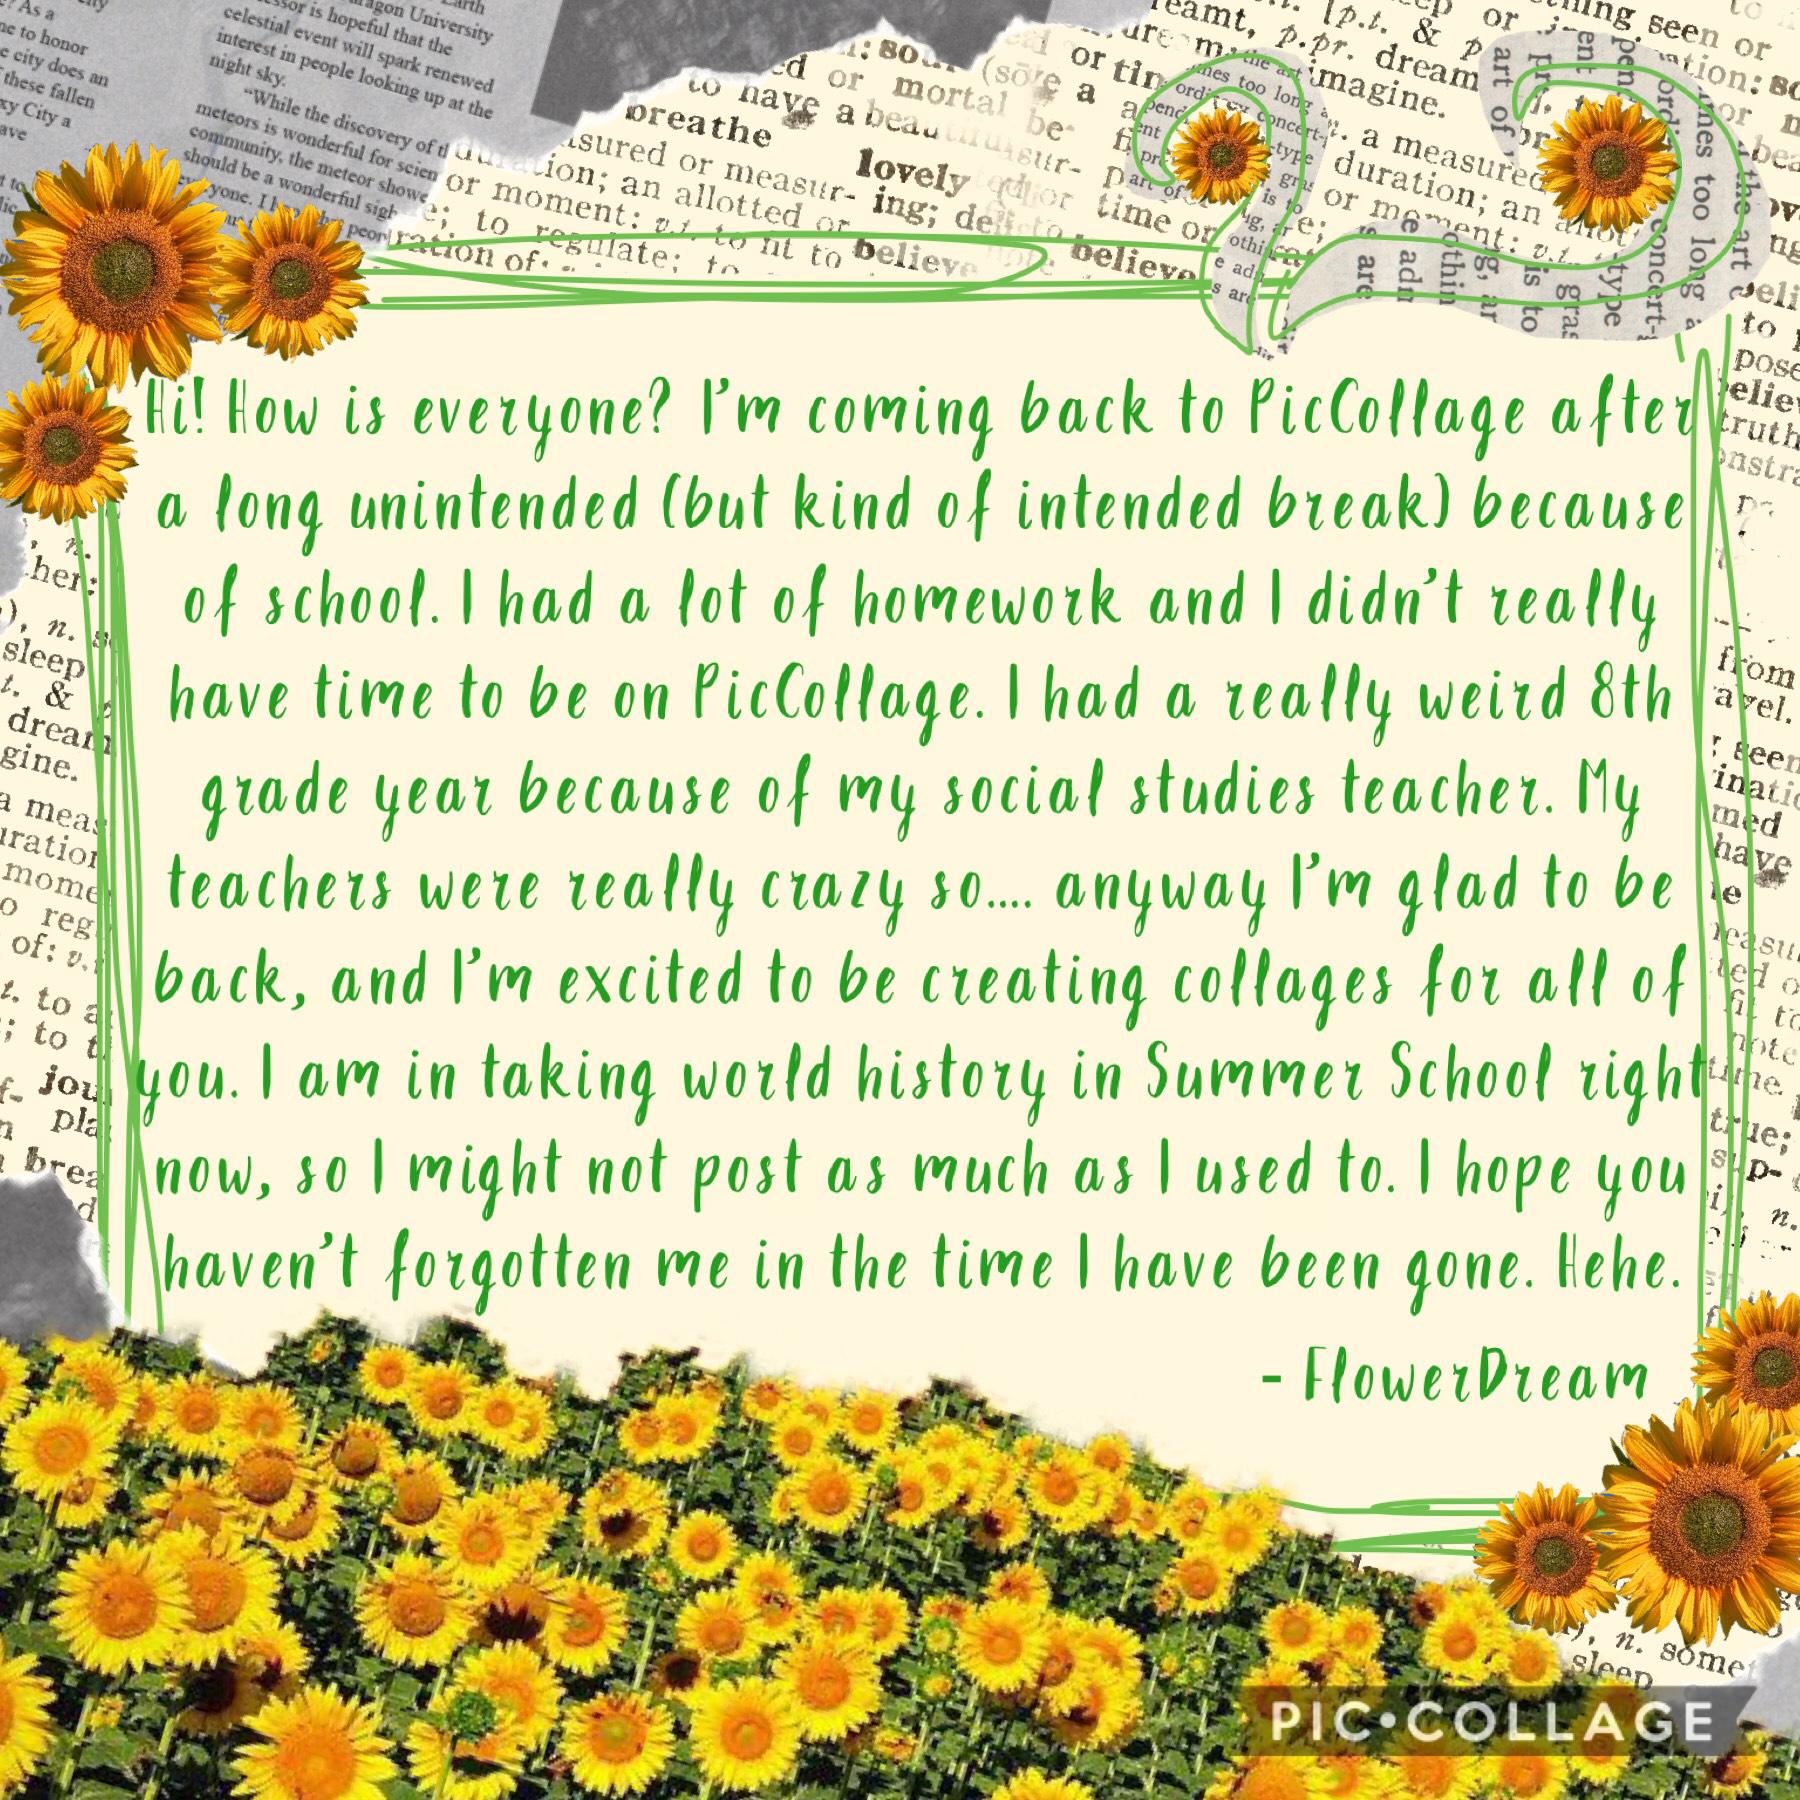 🌻 I’m back! 🌻














💛 Long story short my social studies teacher was very scary, but I miss him because he was a good teacher. He gave me a lot of interesting stories to tell. 💛